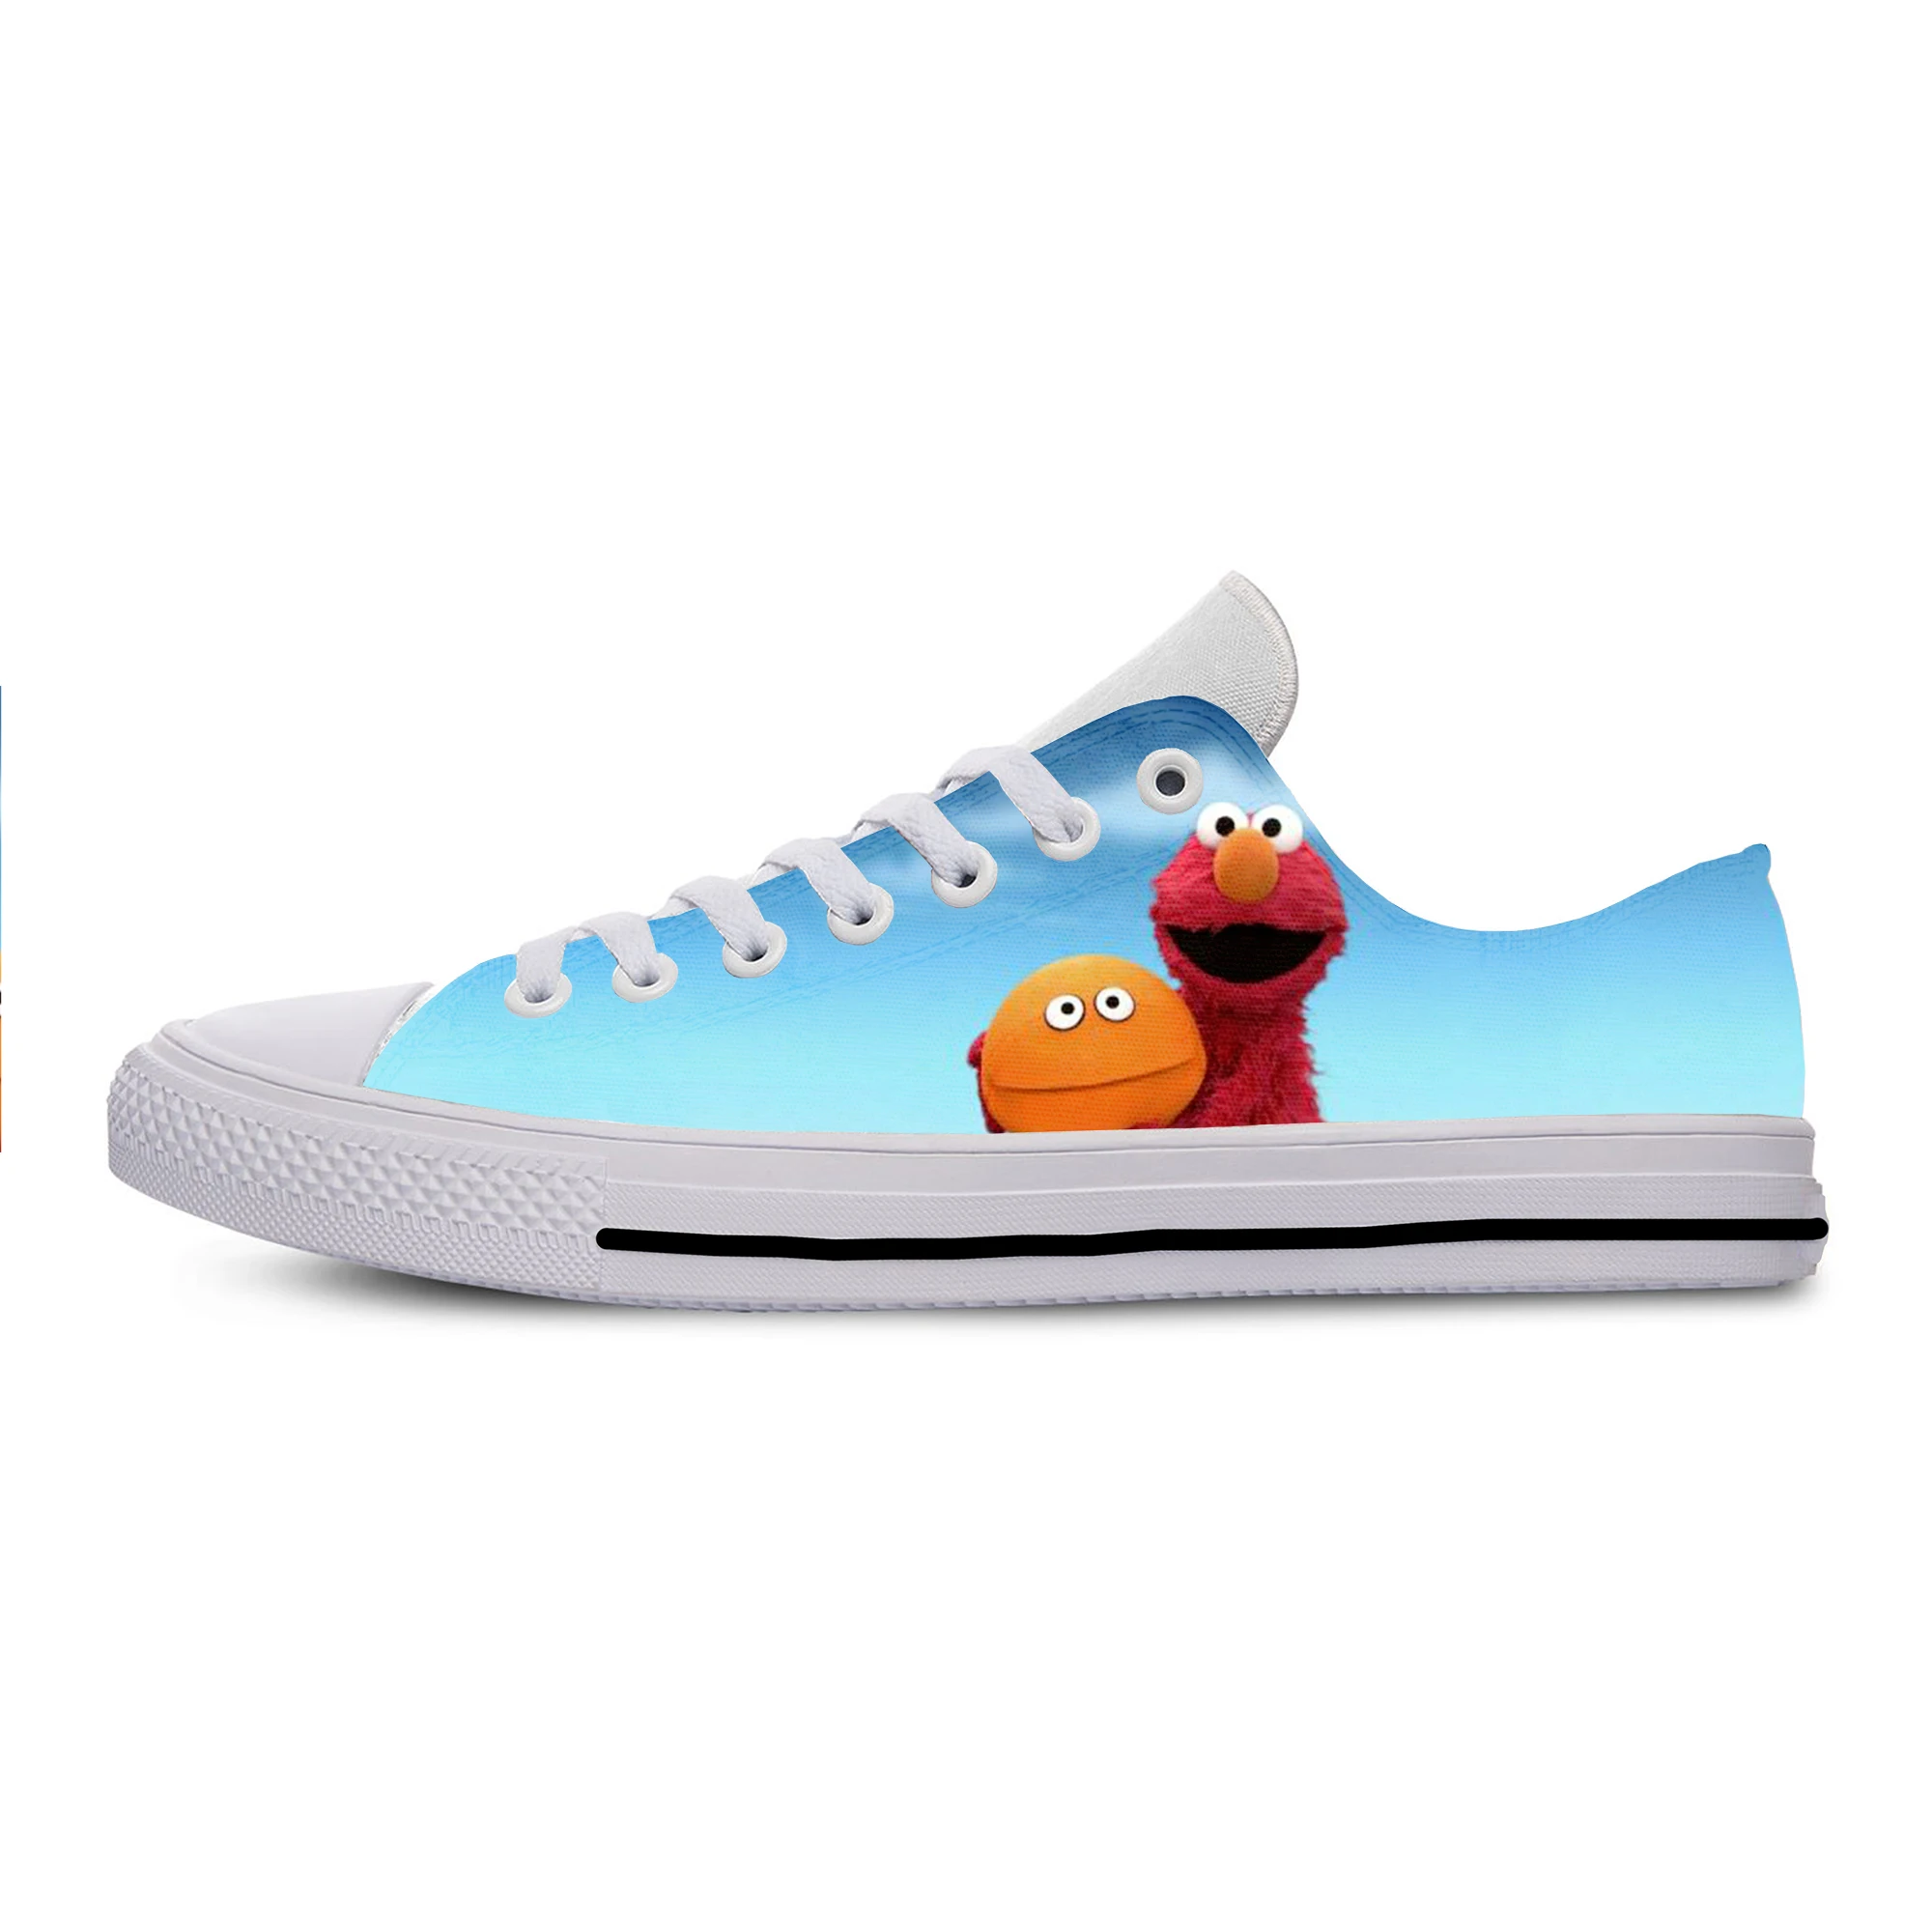 

Hot Cool Summer Sneakers Casual Shoes Cartoon Cute Funny Men Women Sesame Street Elmo Cookie Monster Low Top Classic Board Shoes